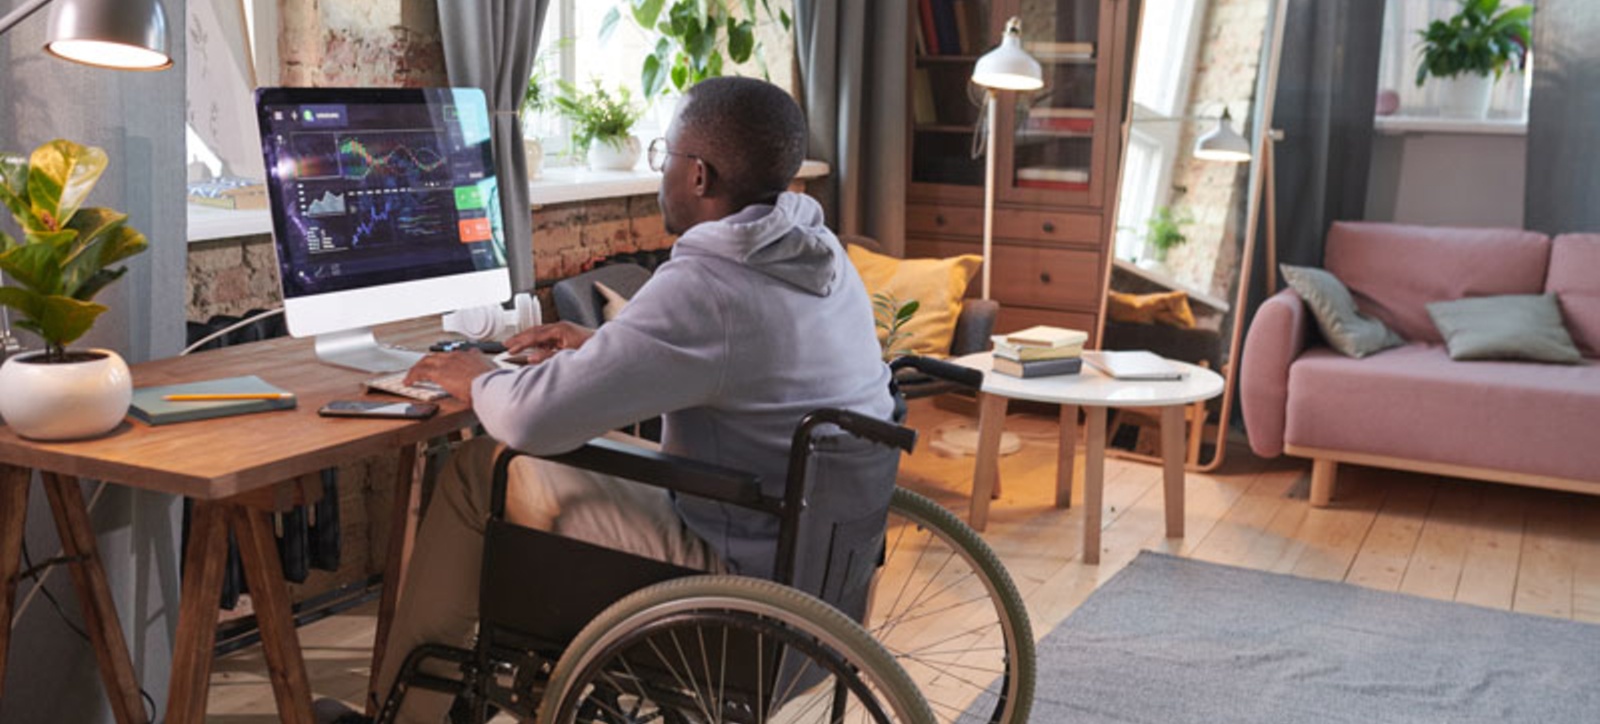 WFH no 'easy fix' for disabled workers' disadvantage